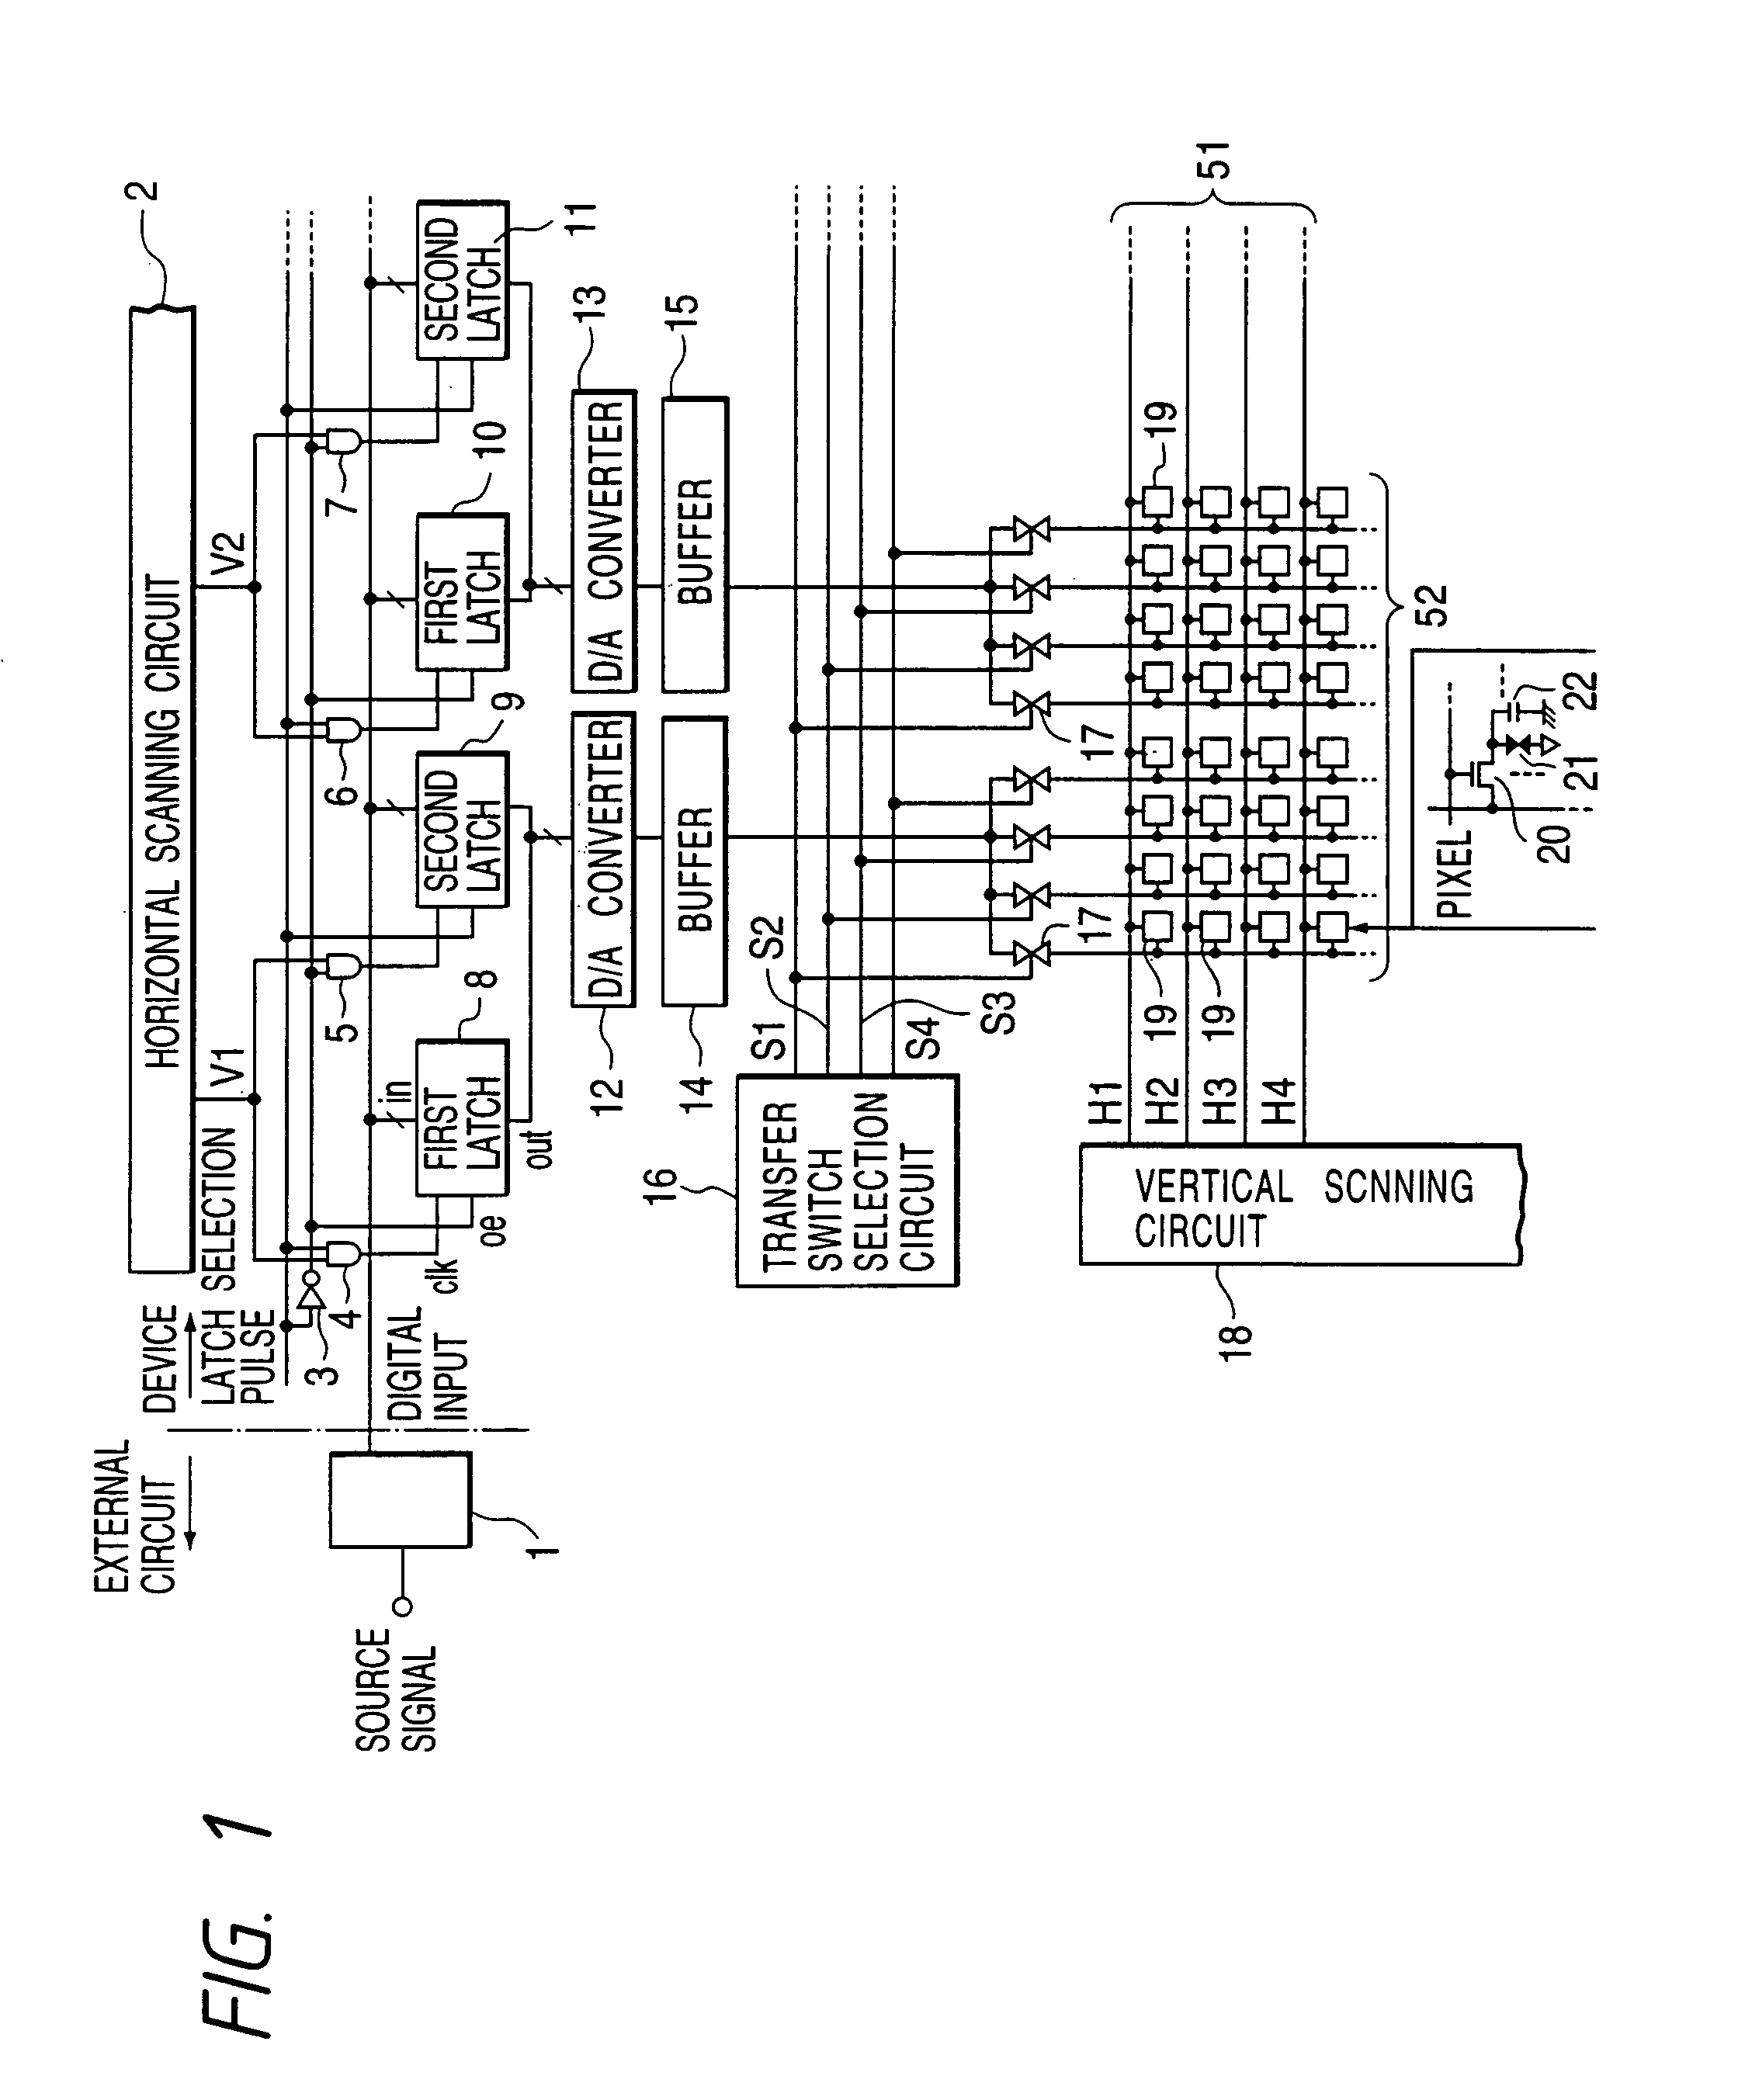 Matrix substrate and display which inputs signal-polarity inverting signals to picture data